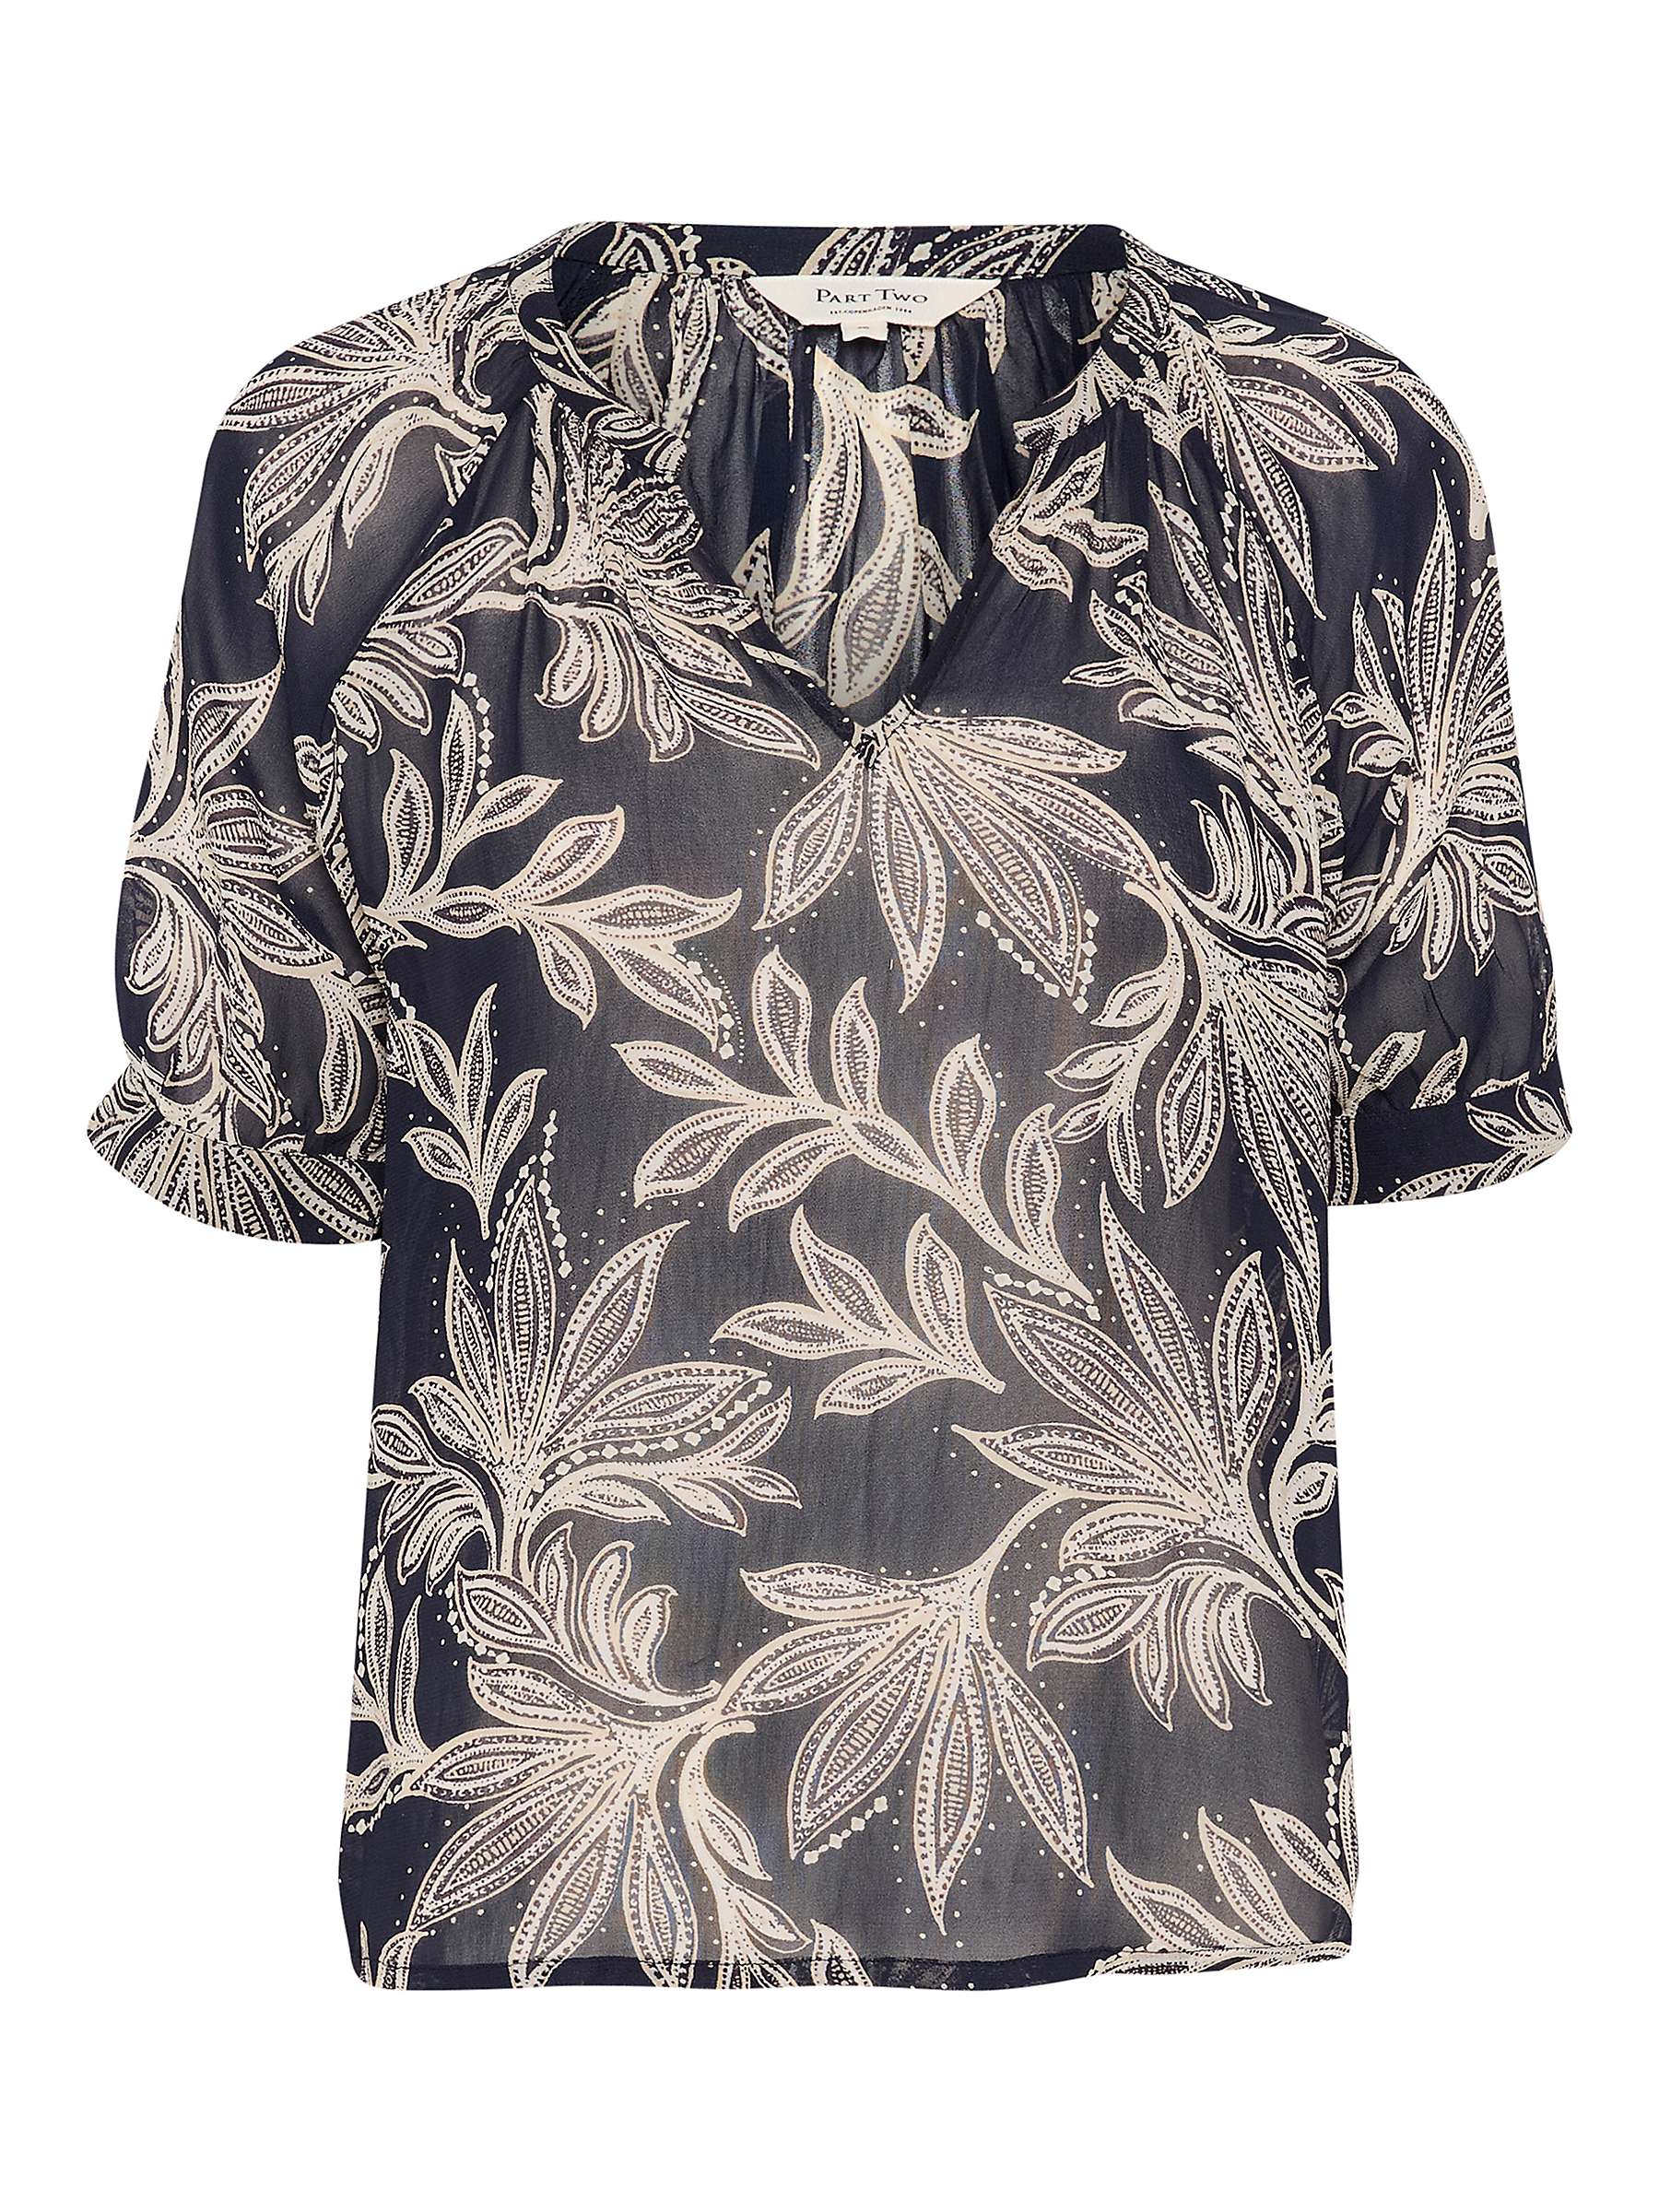 Buy Part Two Popsy Leaf Print Chiffon Blouse Online at johnlewis.com